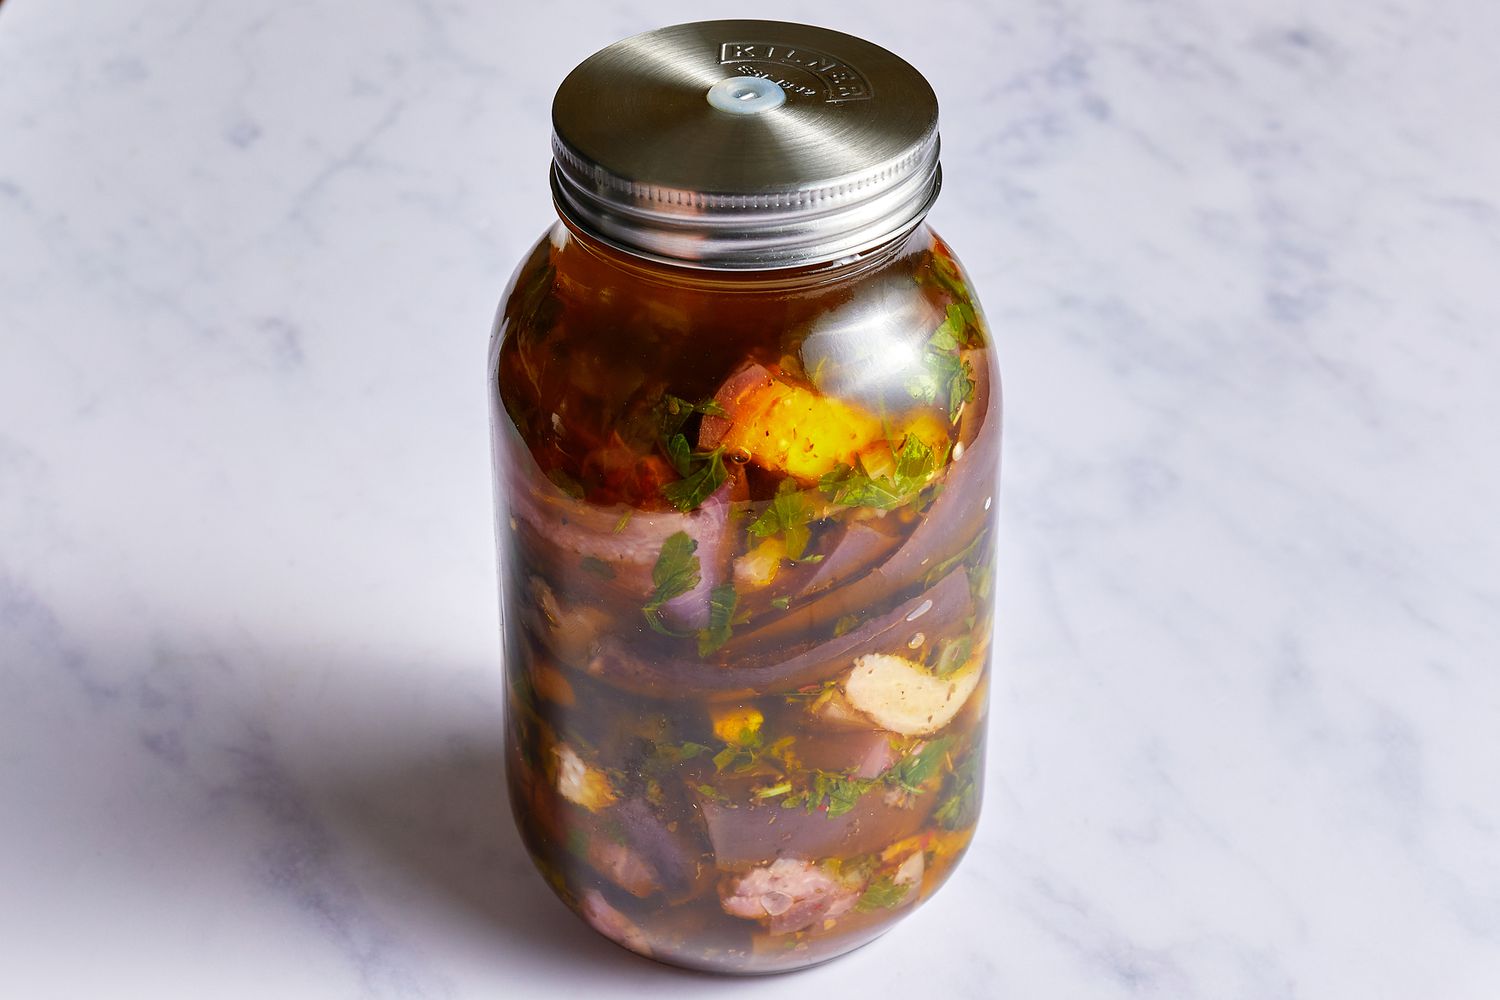 Jar with pickled eggplant closed with a screwtop lid